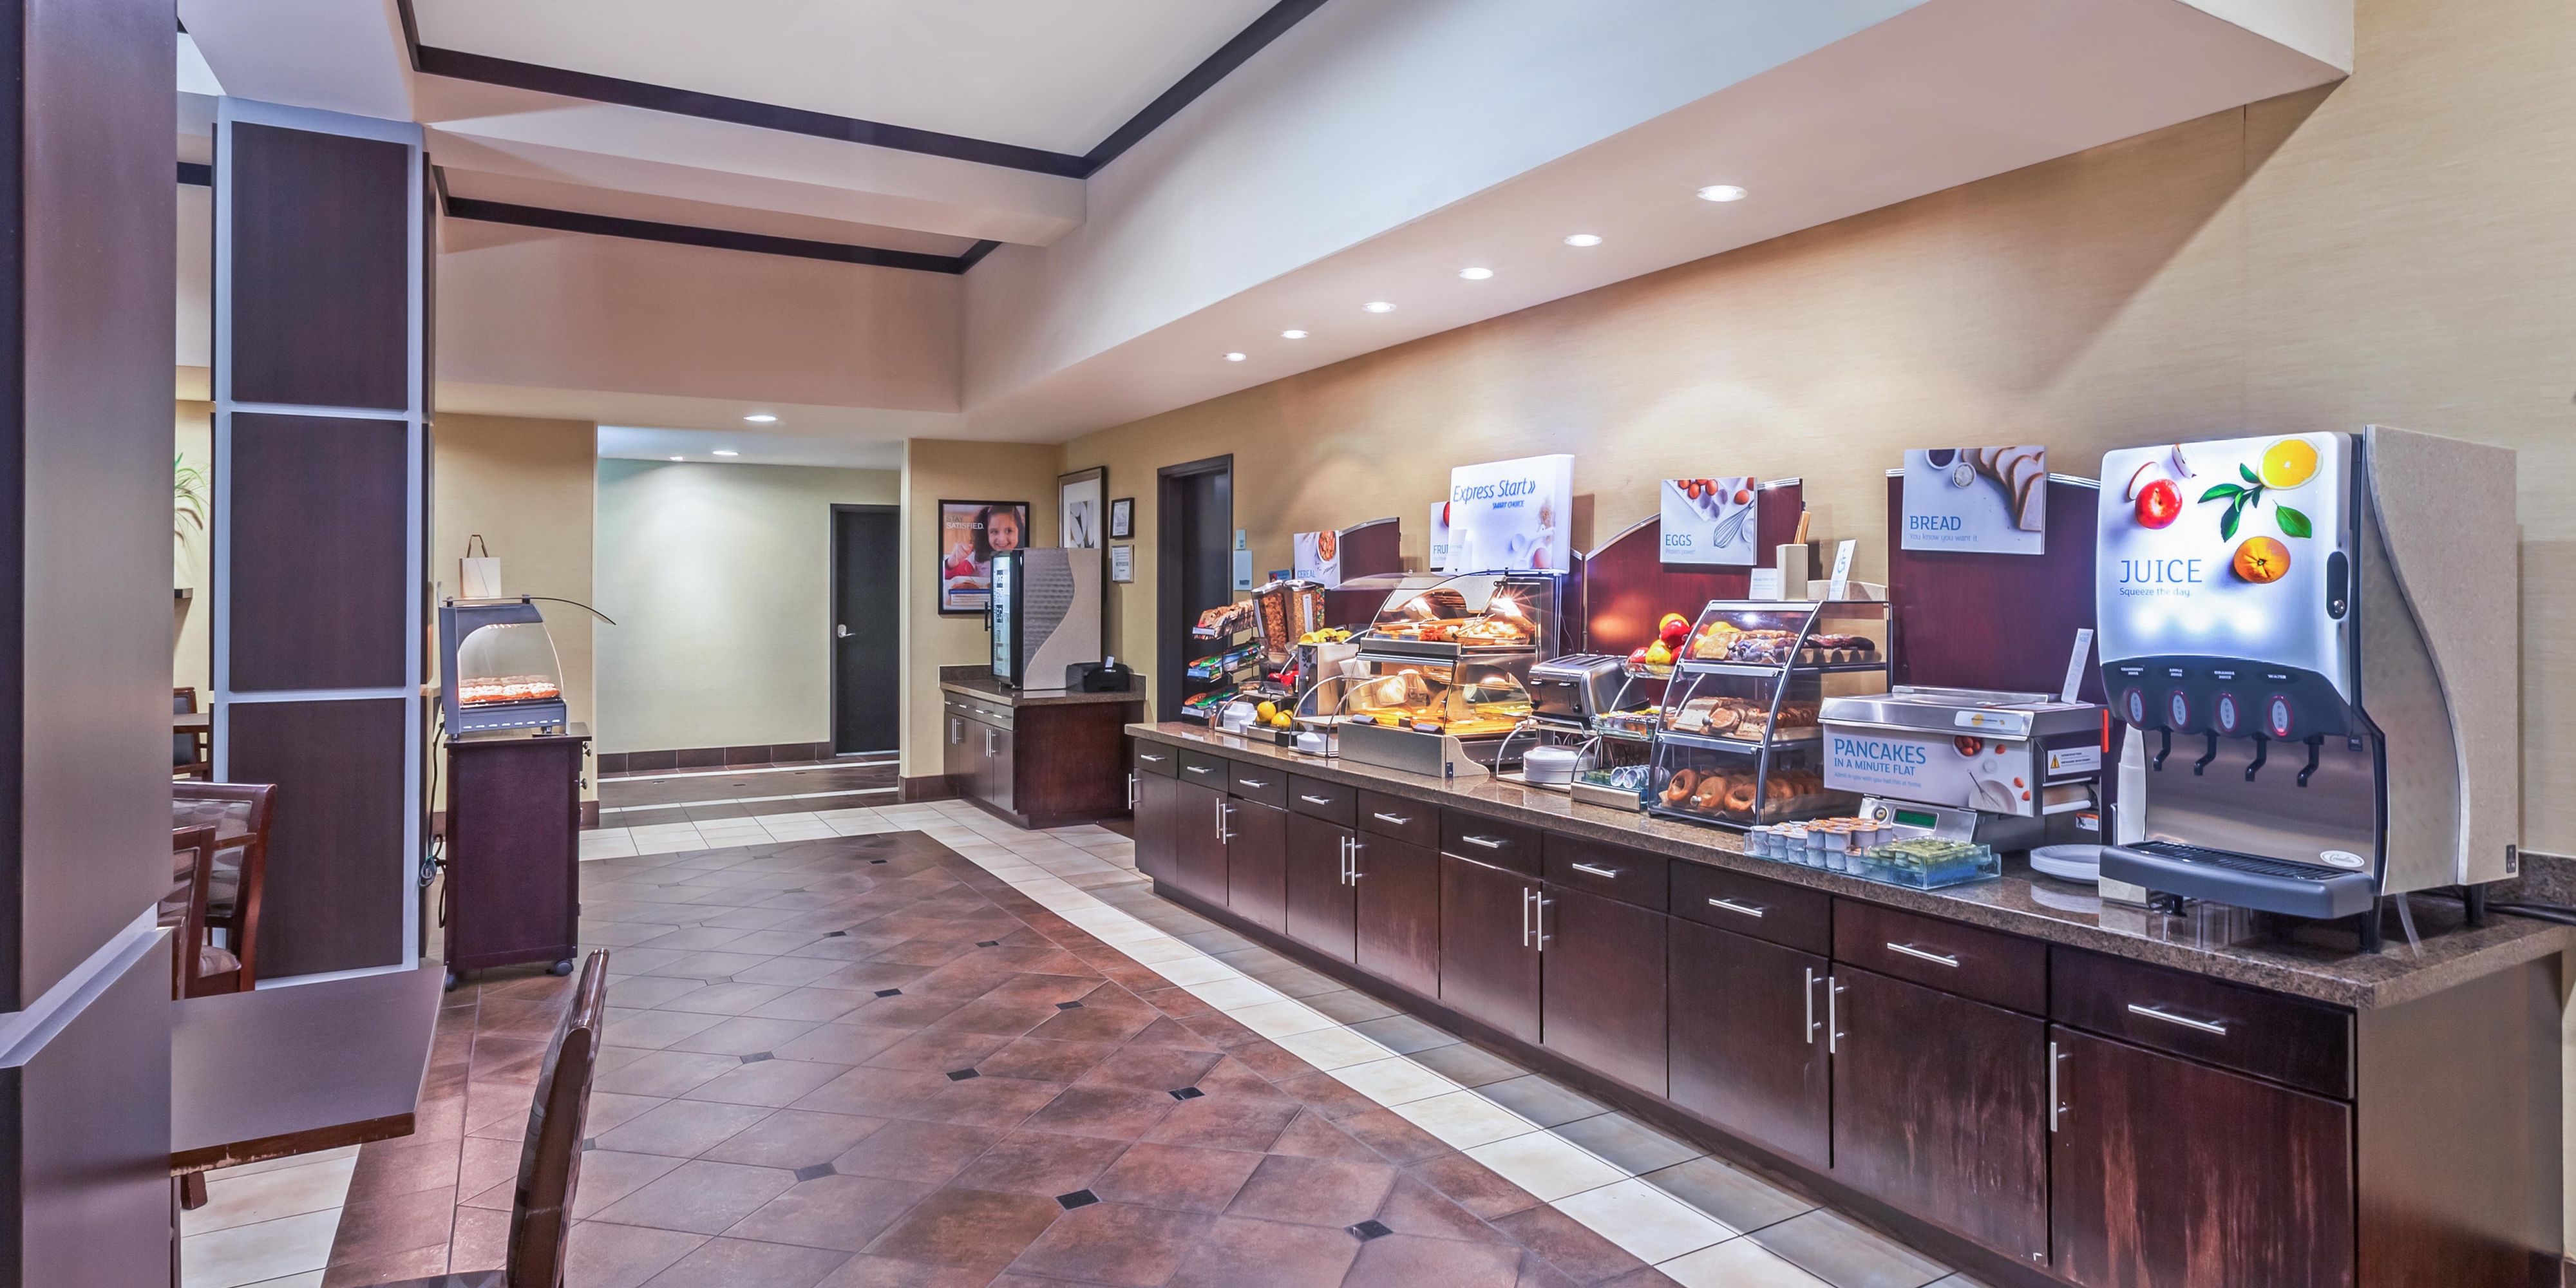 Our complimentary Express Start Breakfast bar offers a wide variety of hot & cold options including a rotation of egg & meat selections, biscuits or muffins, fruit, our famous cinnamon rolls & Smart Roast coffee. Let us fuel you for your day!